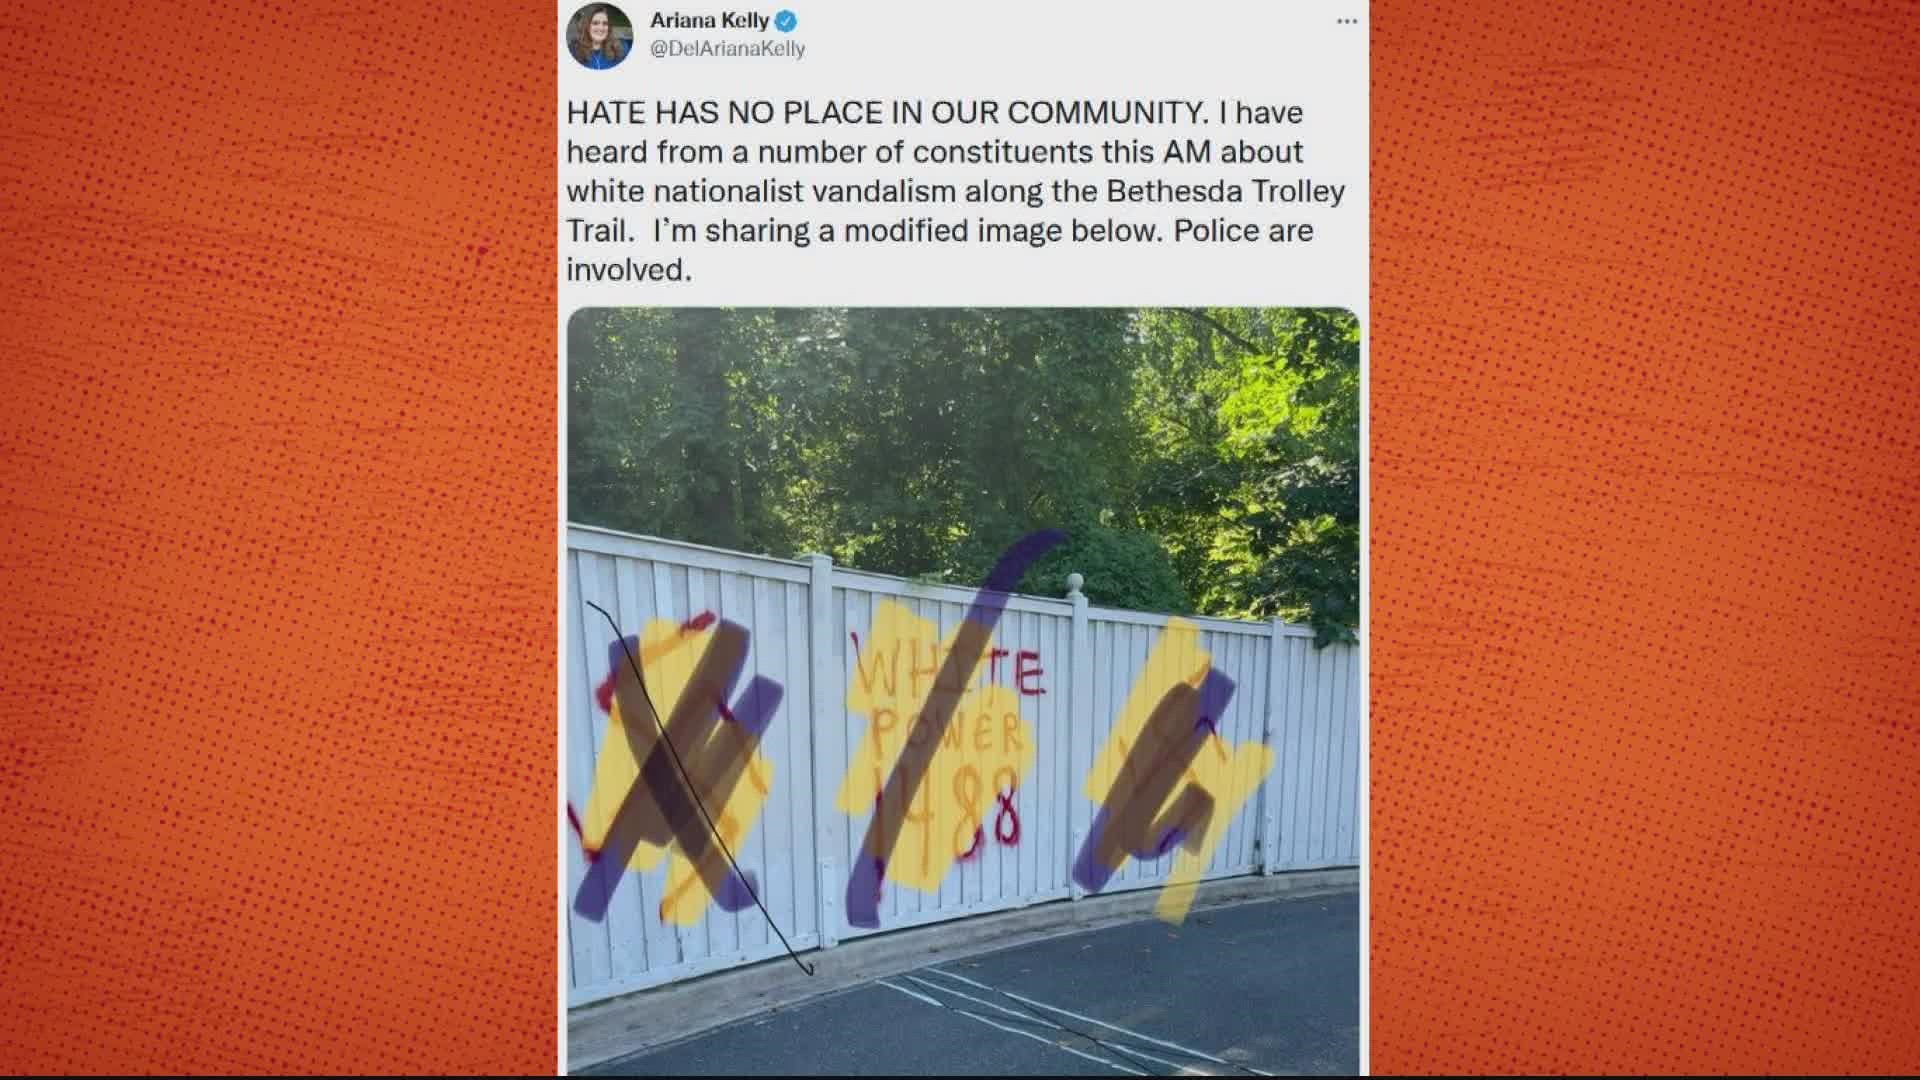 Montgomery County Police are investigating hate symbols spray painted at a Bethesda Trolley Trail.